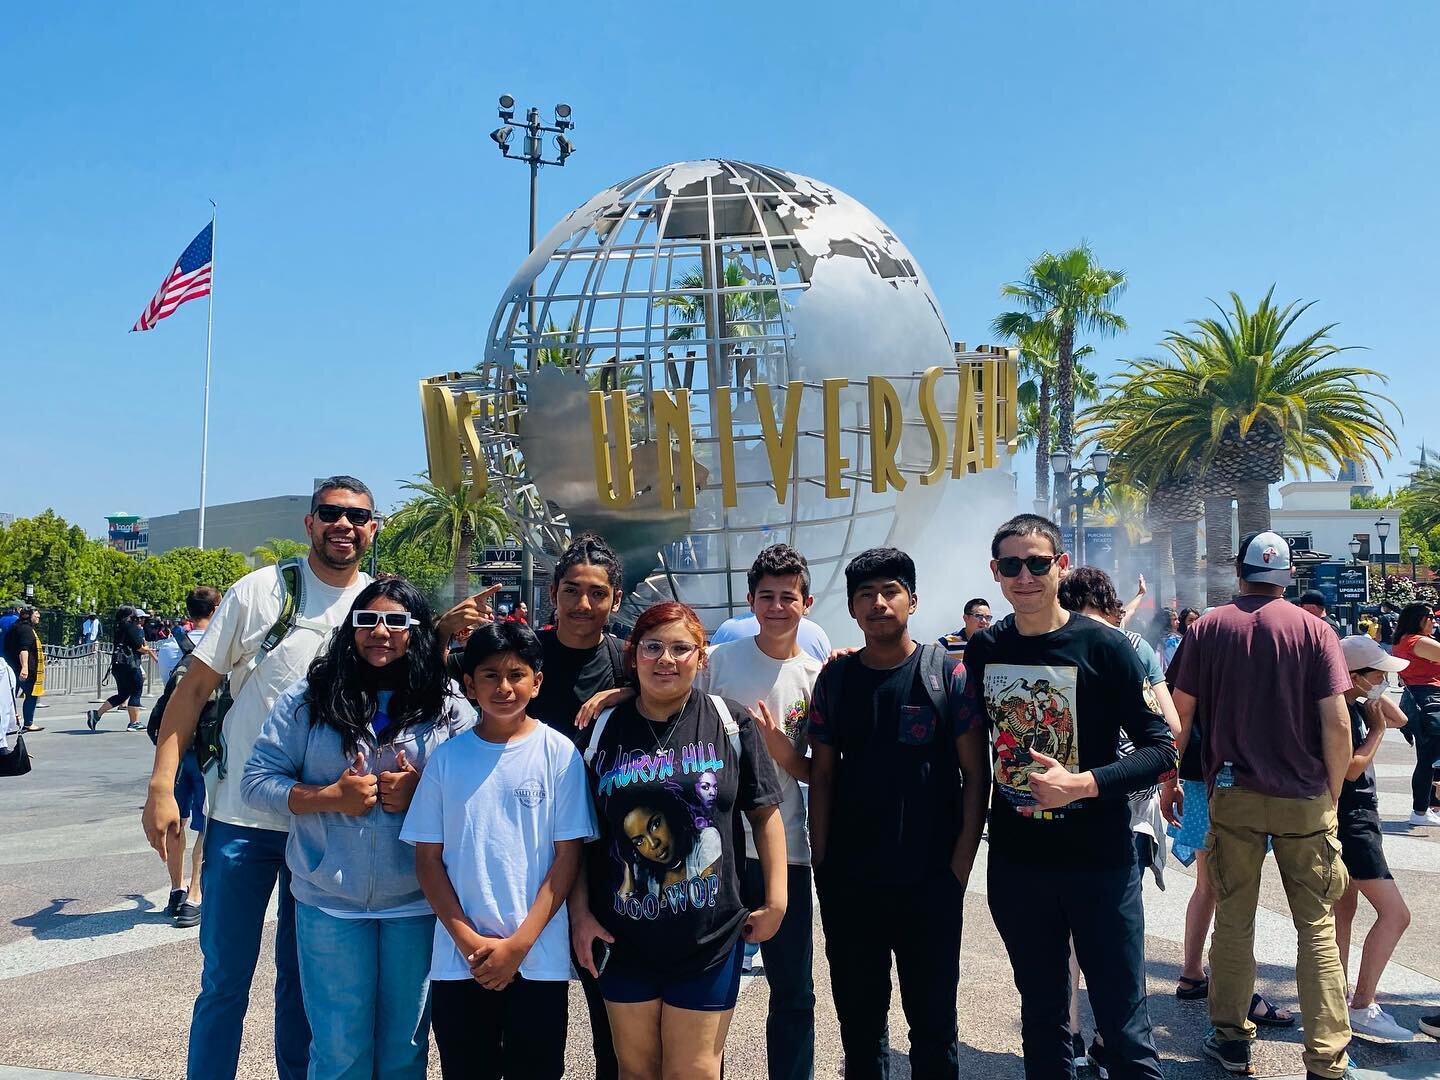 Time For Fun! We had an incredible time taking our amazing young jazz musicians to one of the most enjoyable places in California... Universal Studios Hollywood!
This trip was an opportunity for our students to have fun and continue strengthening the